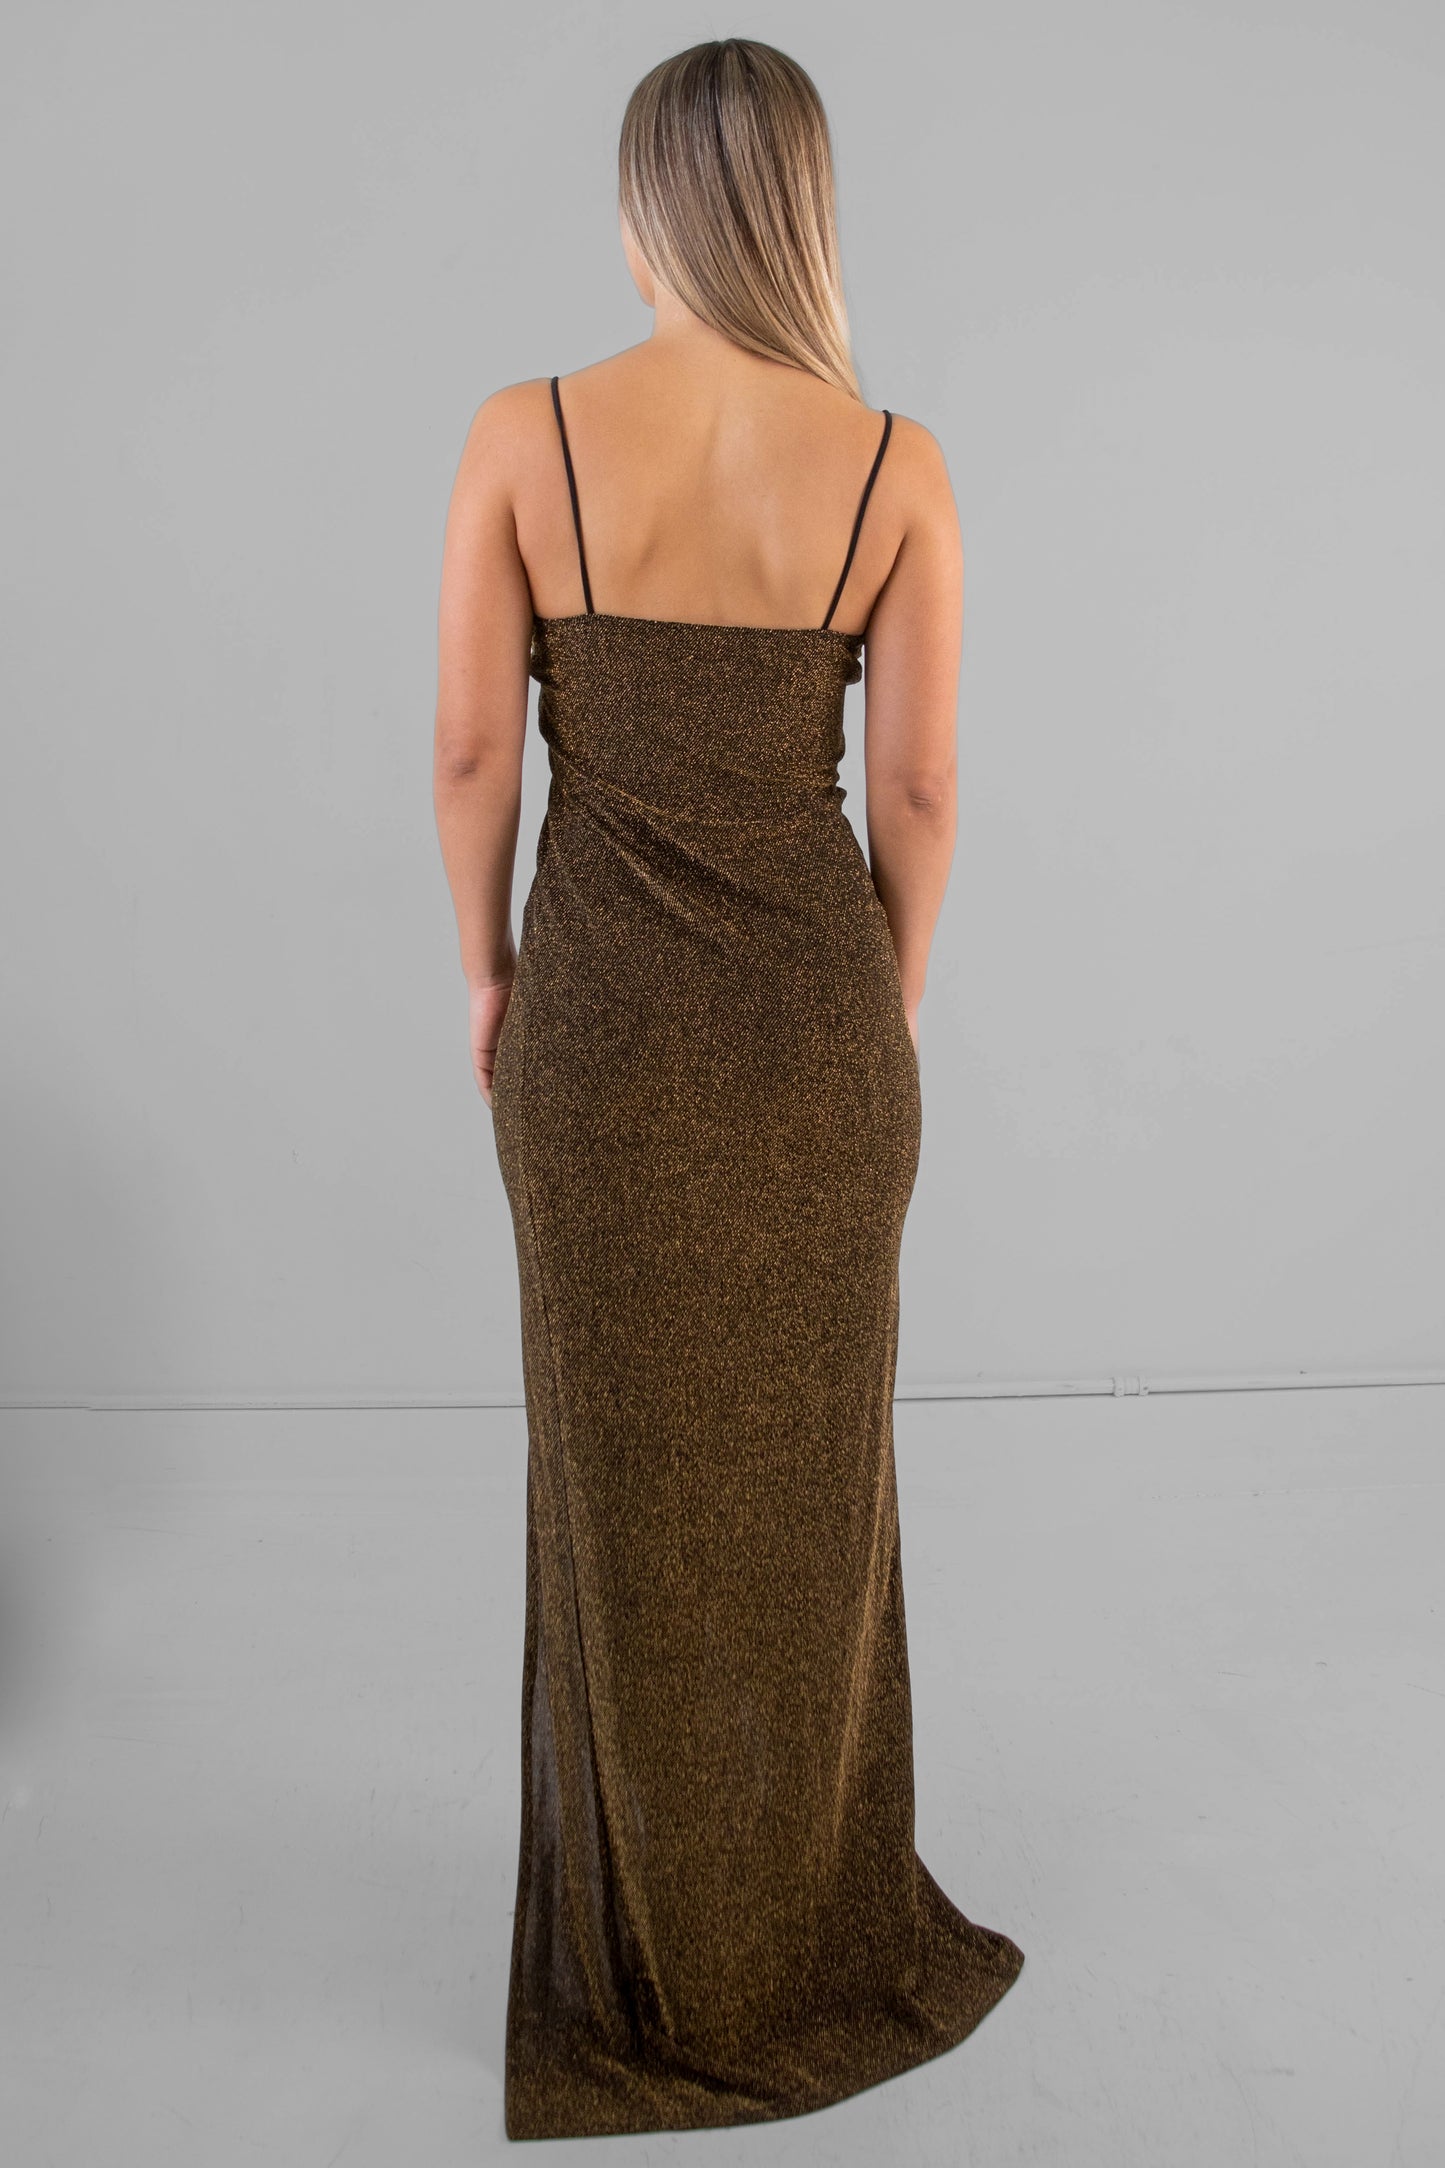 Charlotte Russe "Holiday Gown" Long Dress in Gold Glimmer - Medium